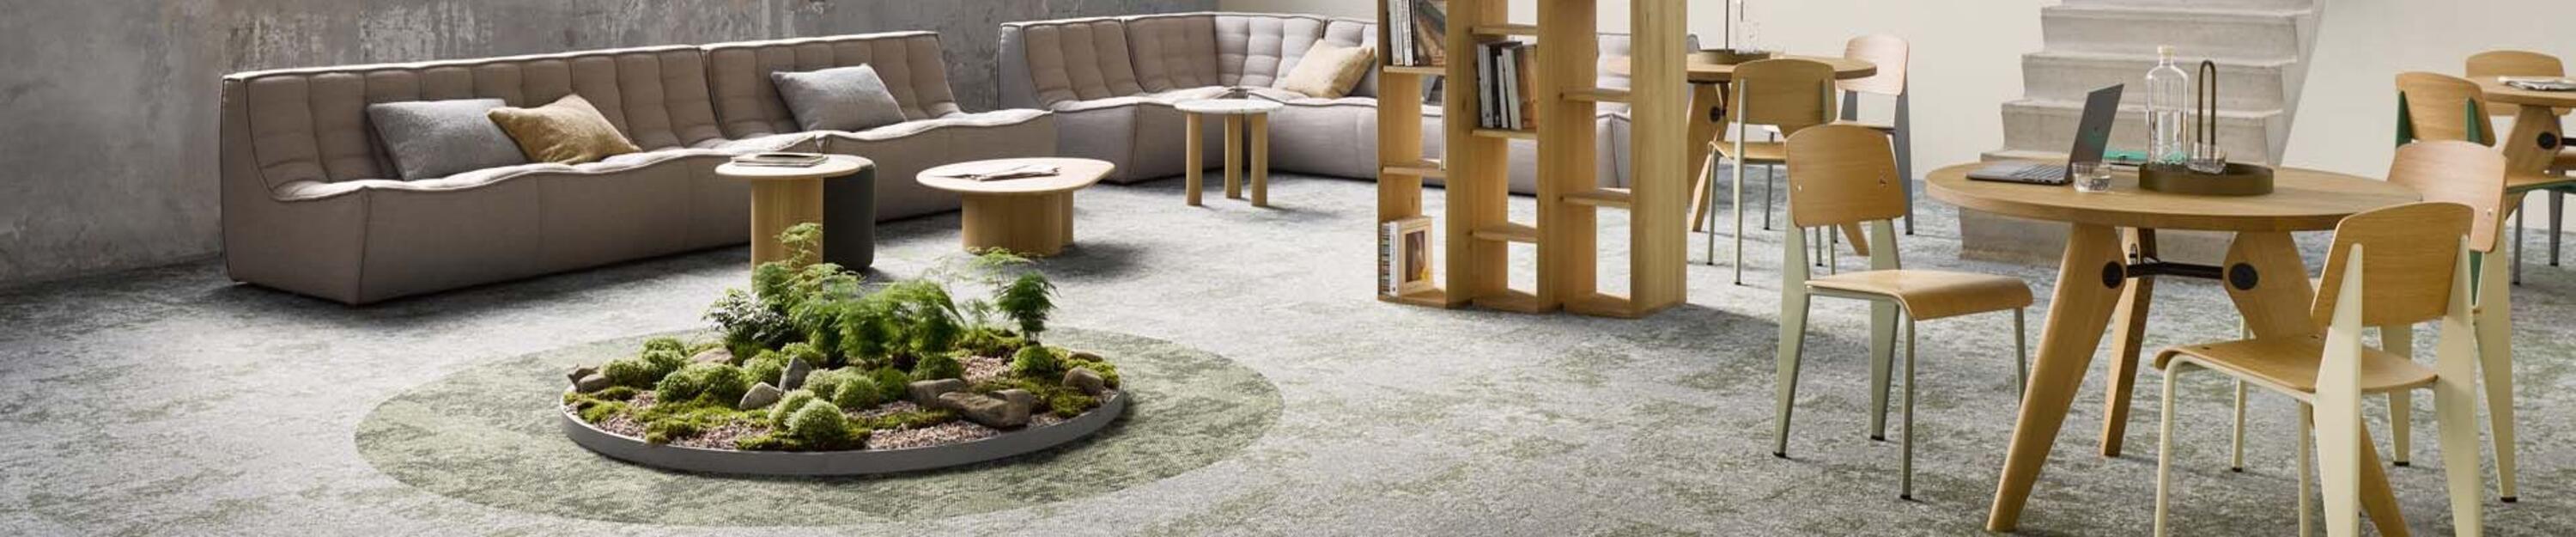 carpet tile collection with organic structures and pigments to create a calming wrokplace atmosphere